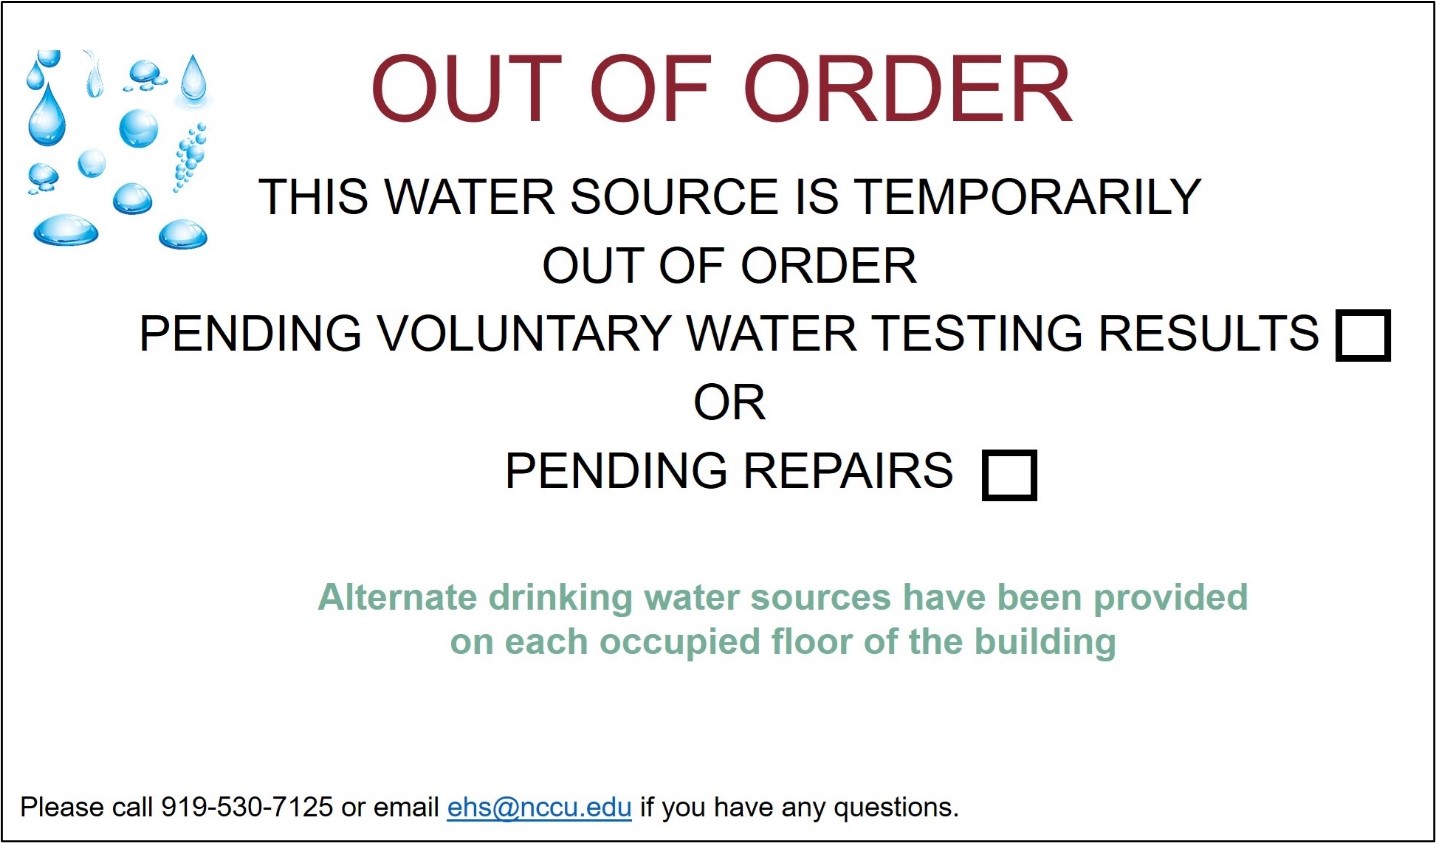 Out of Order - This water source is temporarily out of order. Pending voluntary testing results or pending repairs. Alternate drinking water sources have been provided on each occupied floor of the building. Please call 919-530-7125 or email ehs@nccu.edu if you have any questions.